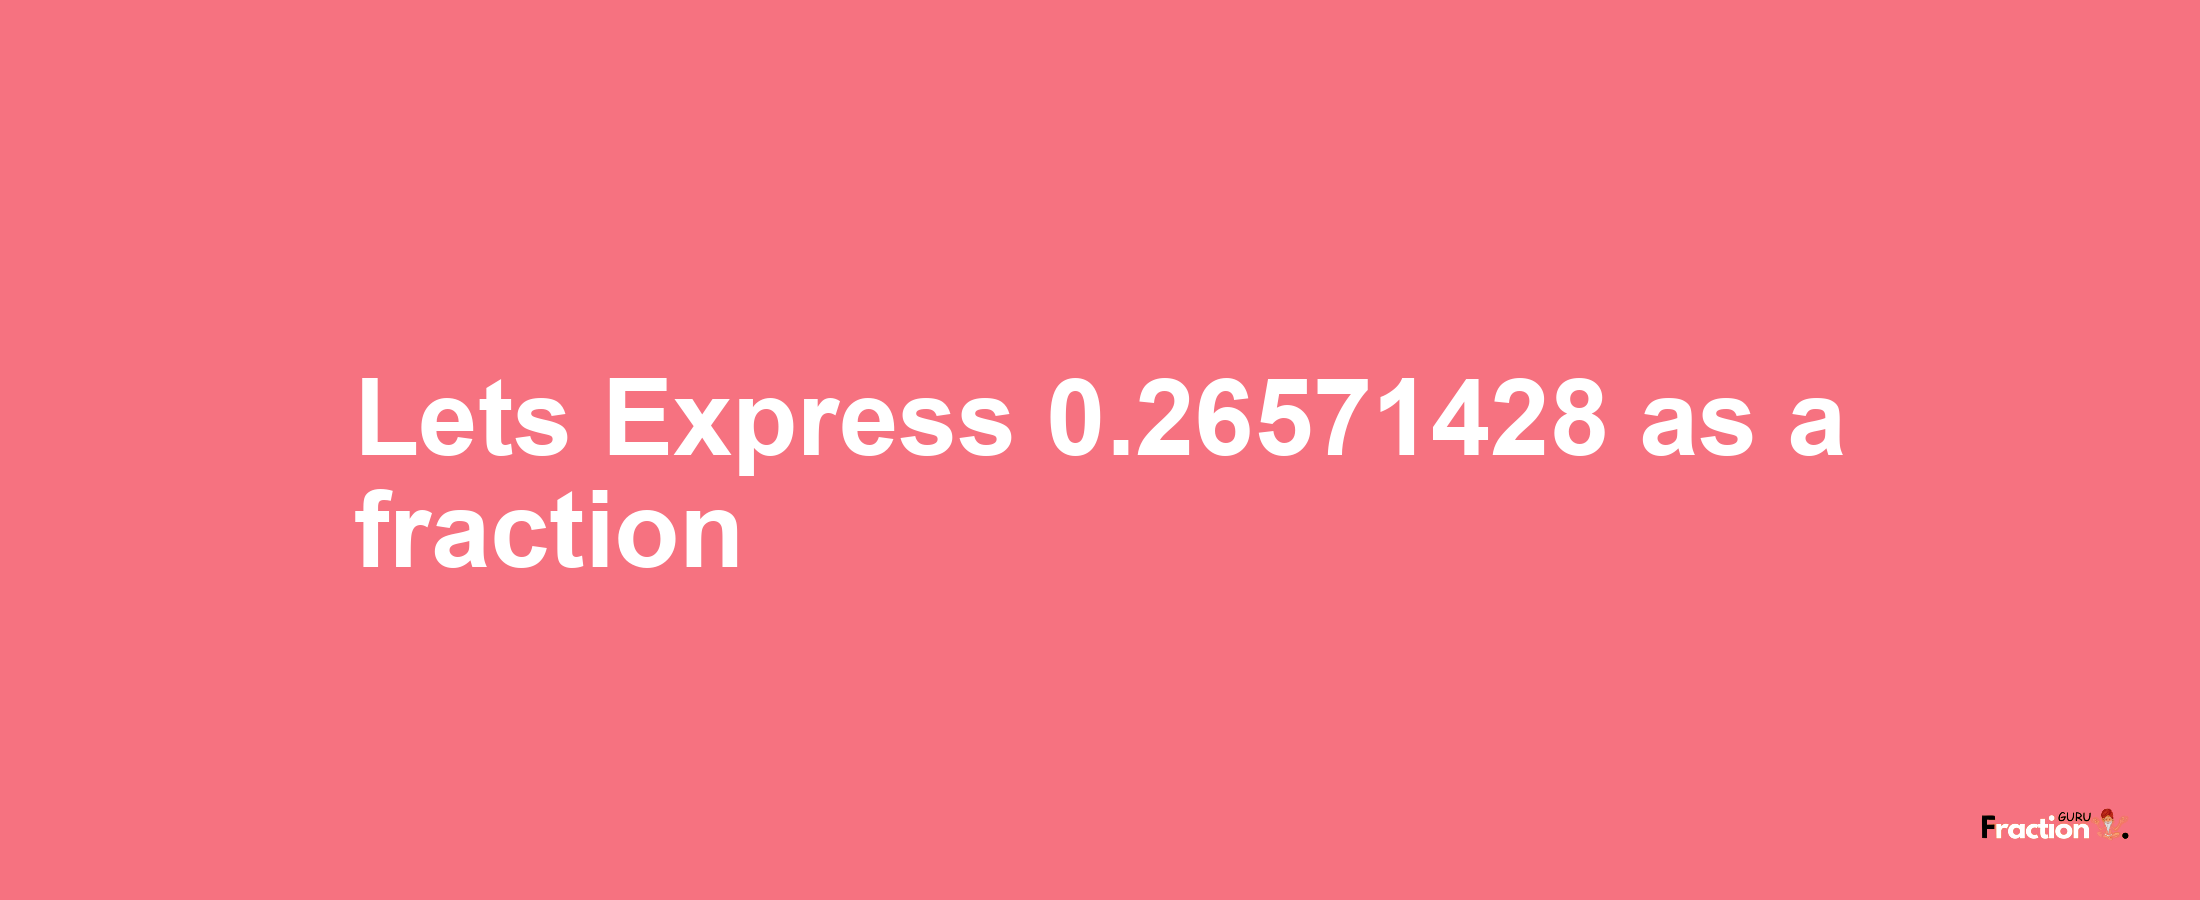 Lets Express 0.26571428 as afraction